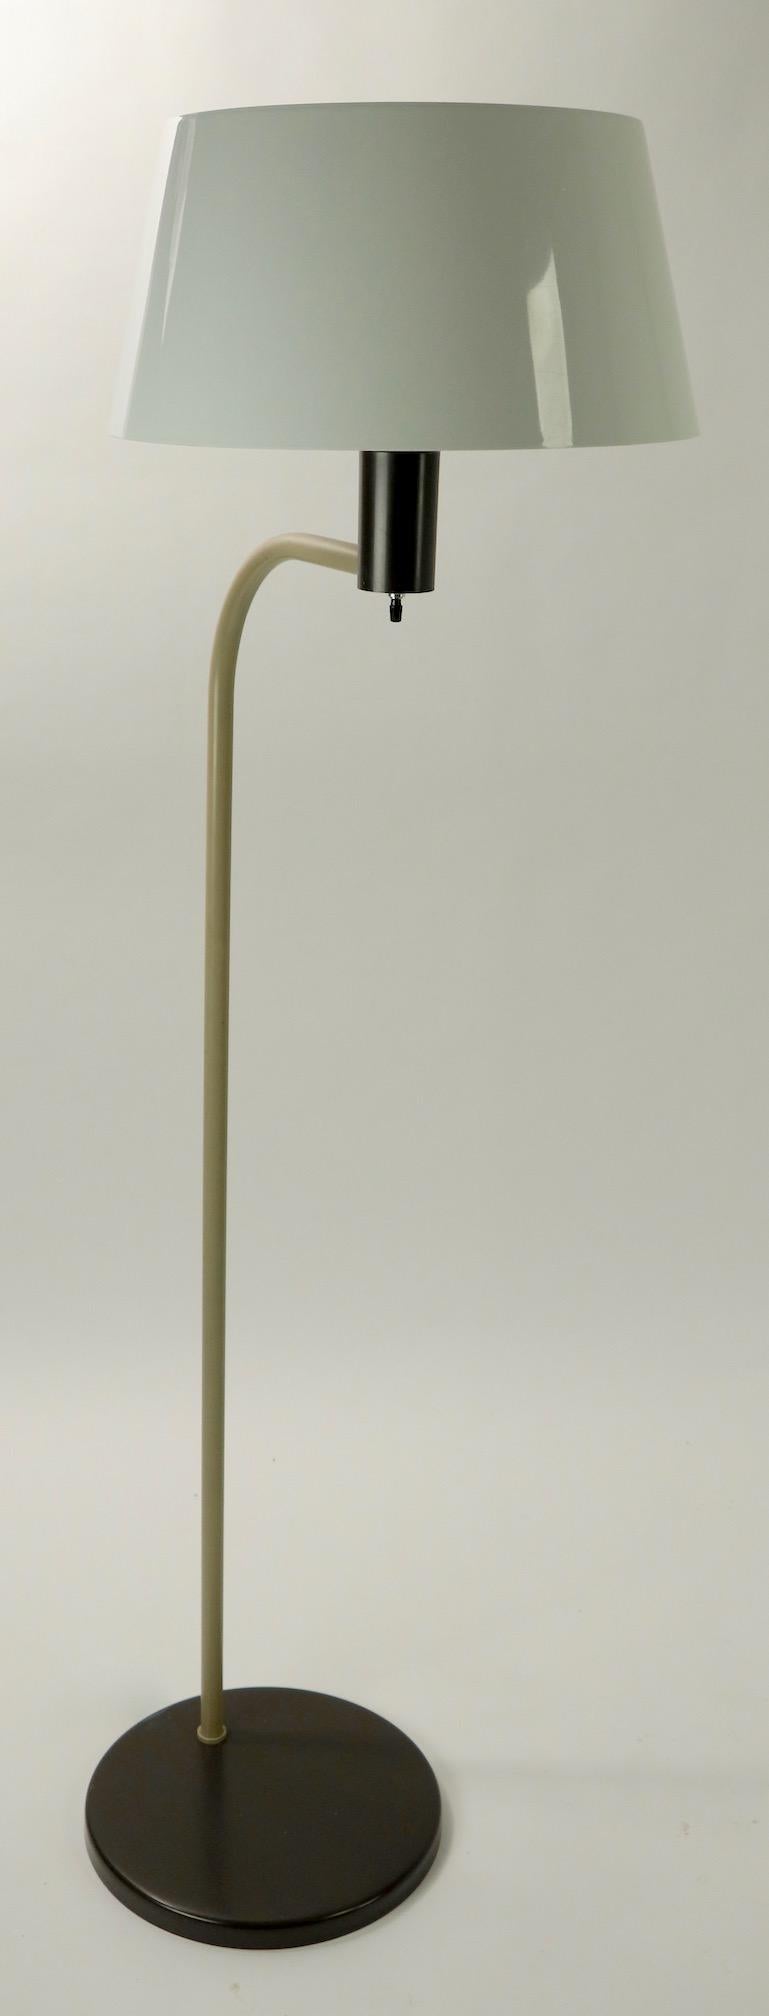 Cool Postmodern Gerald Thurston design for Lightolier floor lamp, in extra clean, original and working condition. The lamp has a white plastic shade and two-tone metal base.
Measures: Diameter of shade 13.5 x height of shade 7 x arm projection 17 x